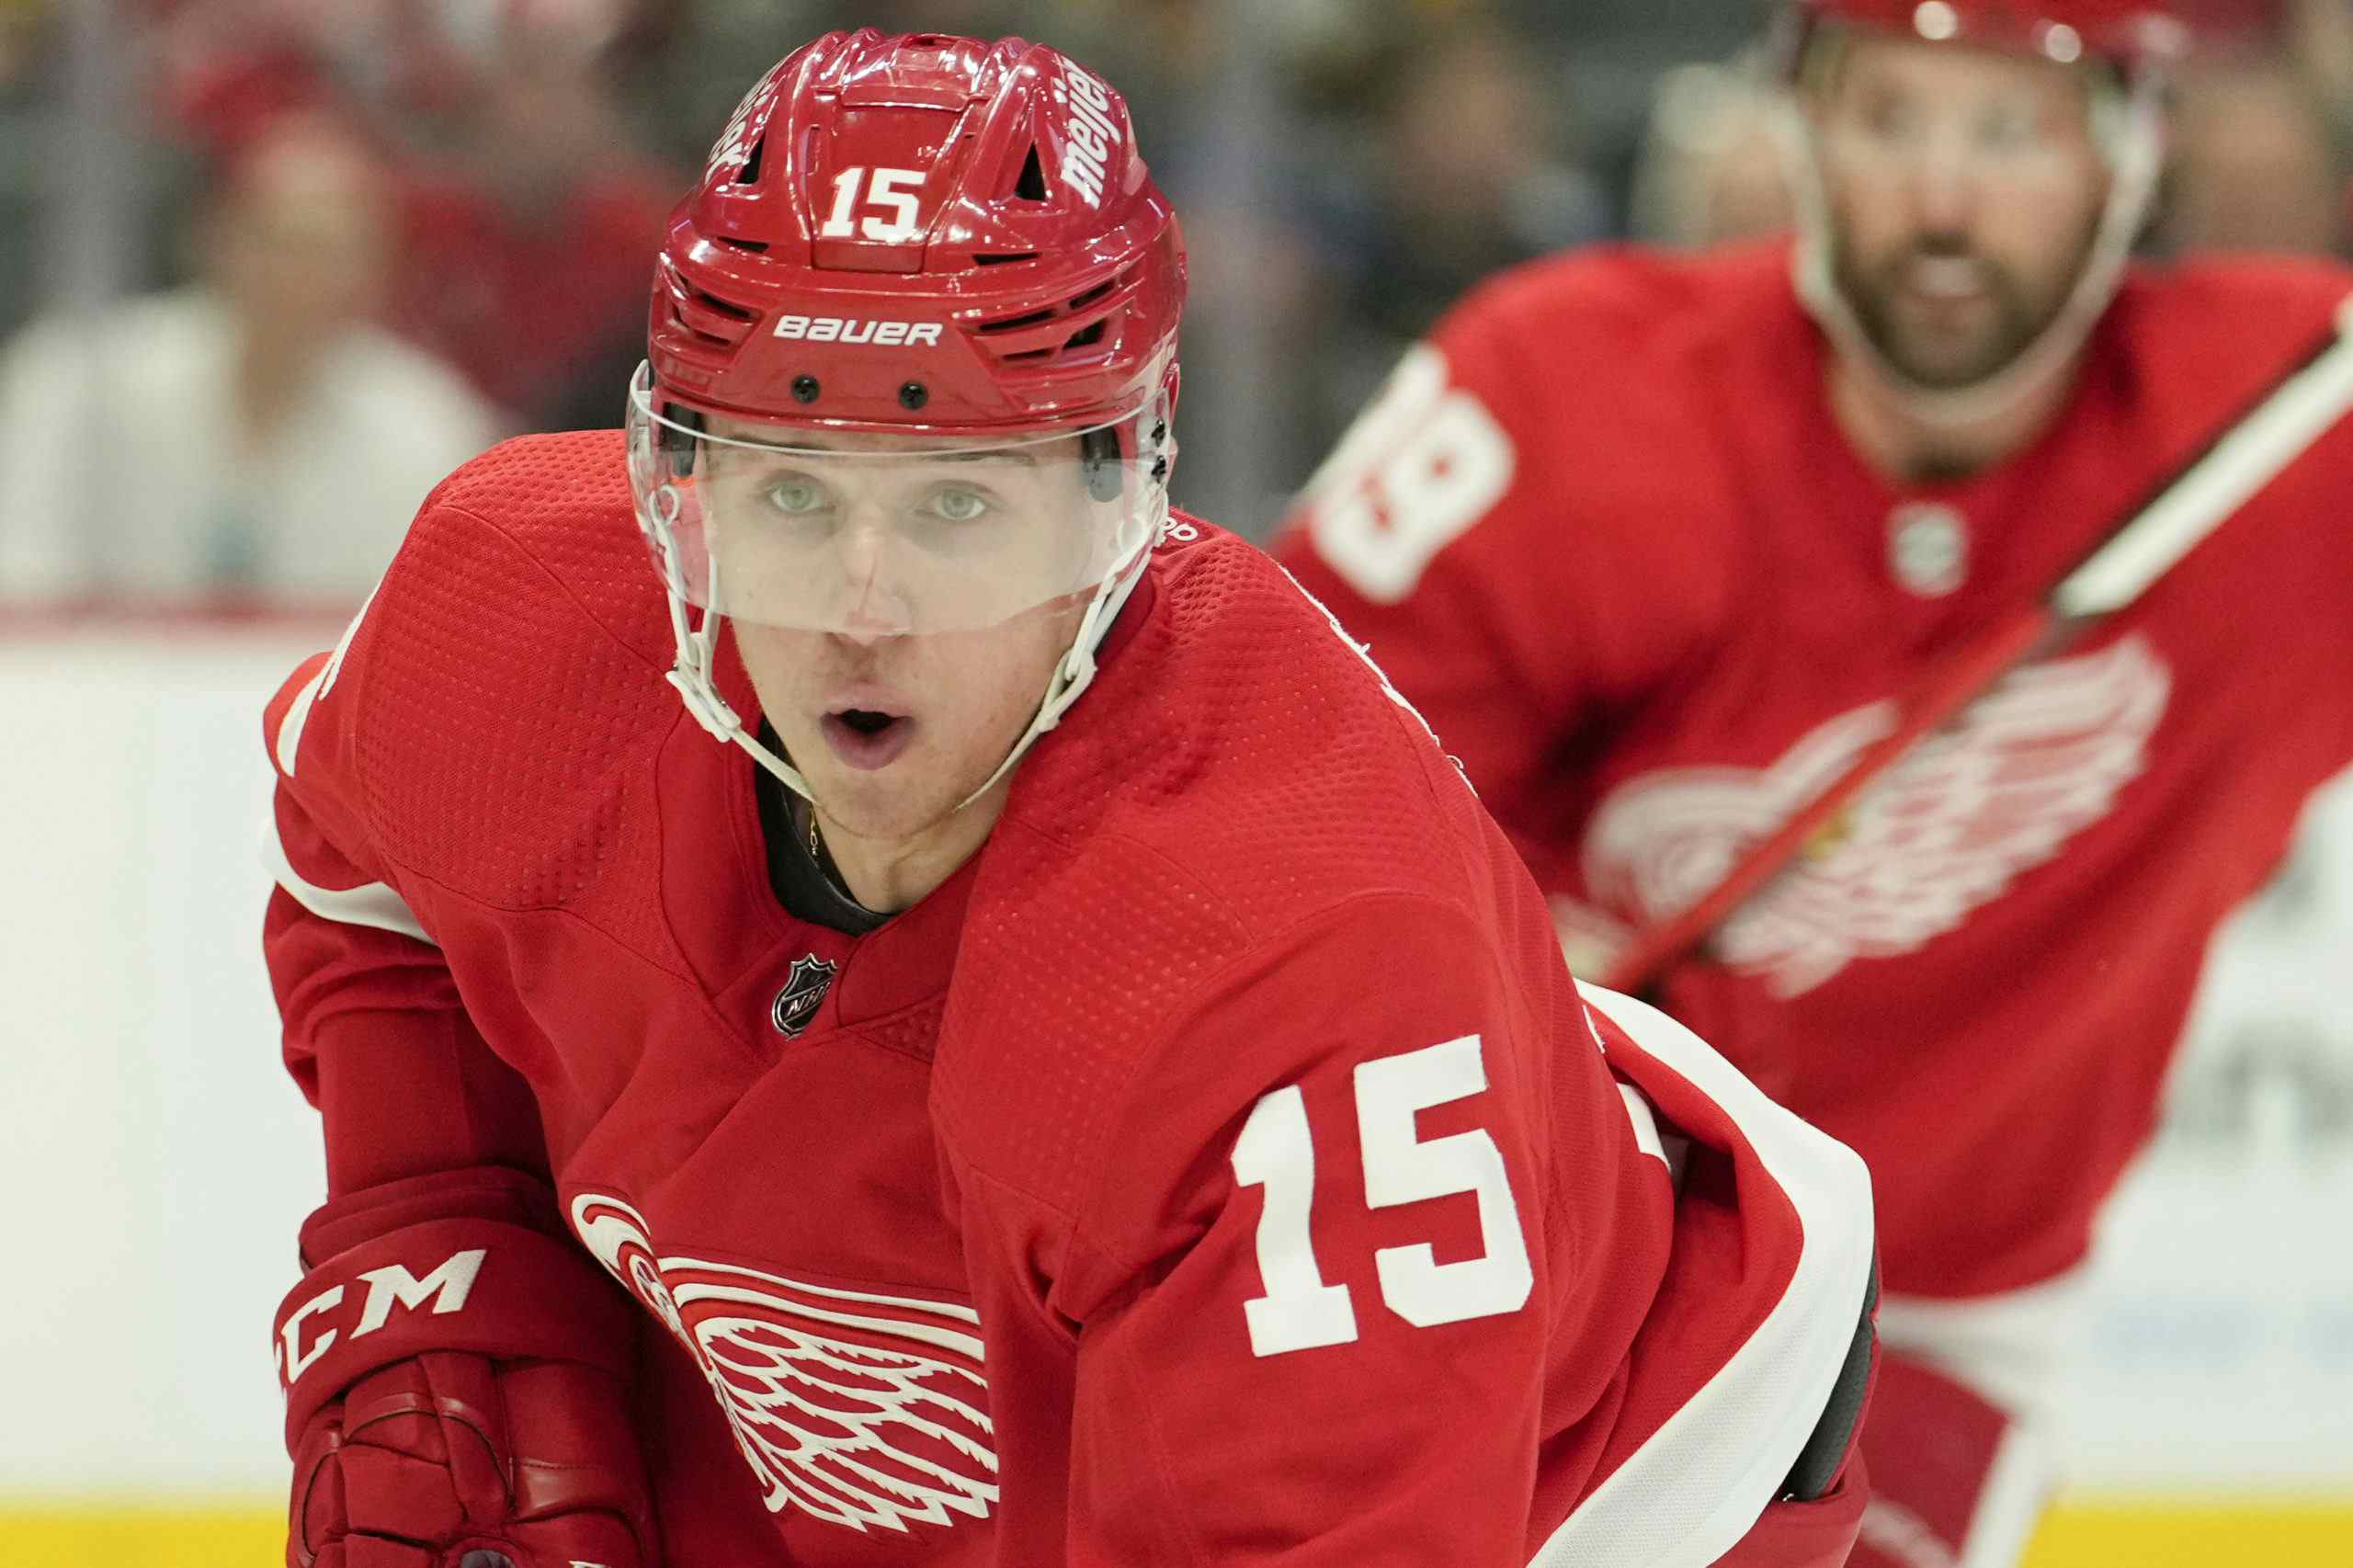 Tyler Bertuzzi out 4-6 weeks after upper-body injury, Red Wings